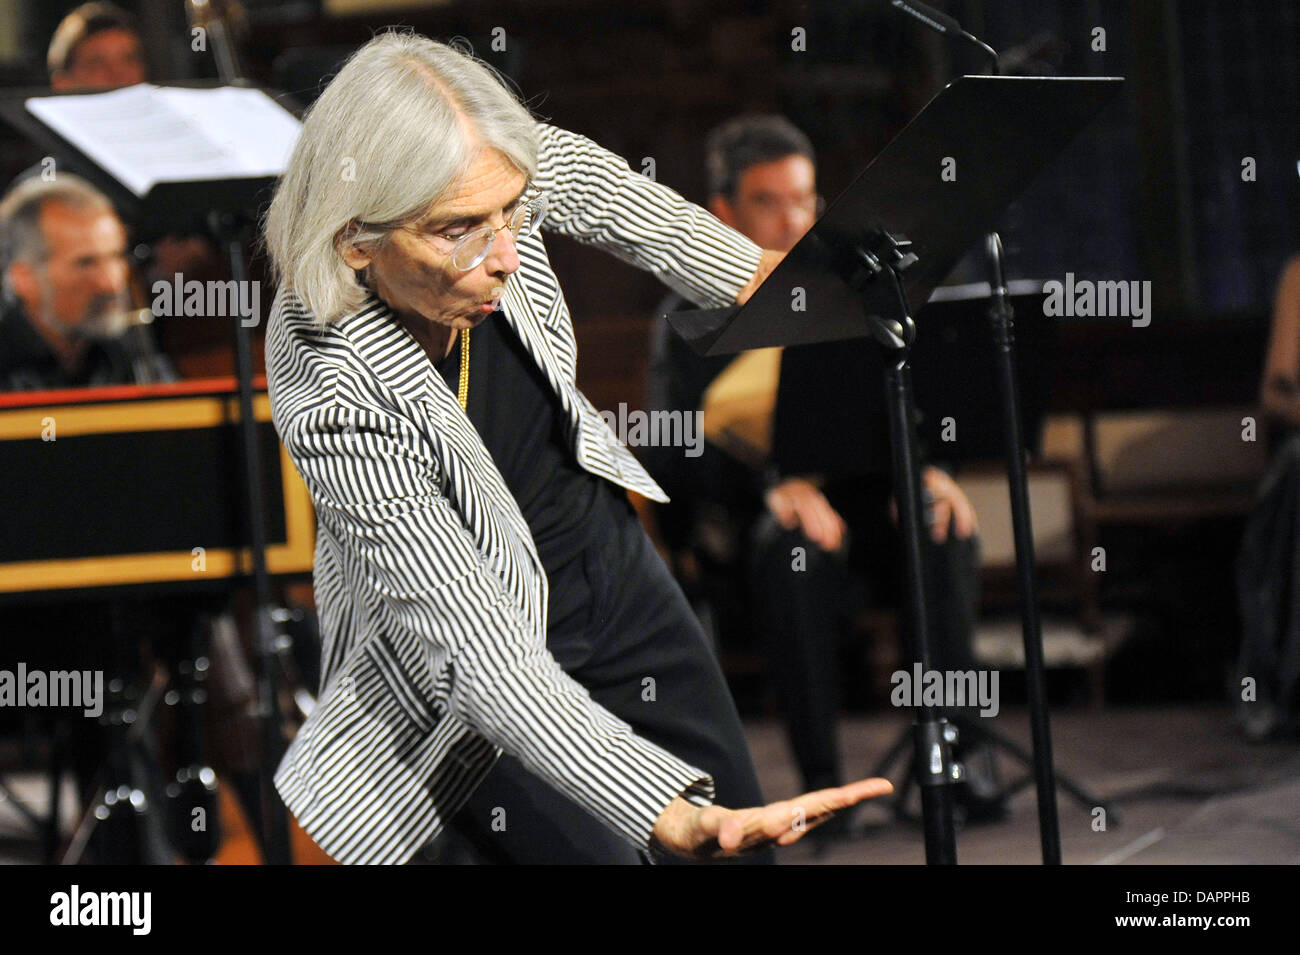 US writer Donna Leon reads from one of her books inside city hall in Bremen, Germany, 27 August 2011. The author of crime novels participated in the three-part musical reading 'Animals and Sound - Reading Haendel's Operas' ('Tiere und Toene - Auf Spurensuche in Haendels Opern') at the opening of the 22nd Bremen Music Festival. From 27 August till 17 September 2011, there will be 40 Stock Photo